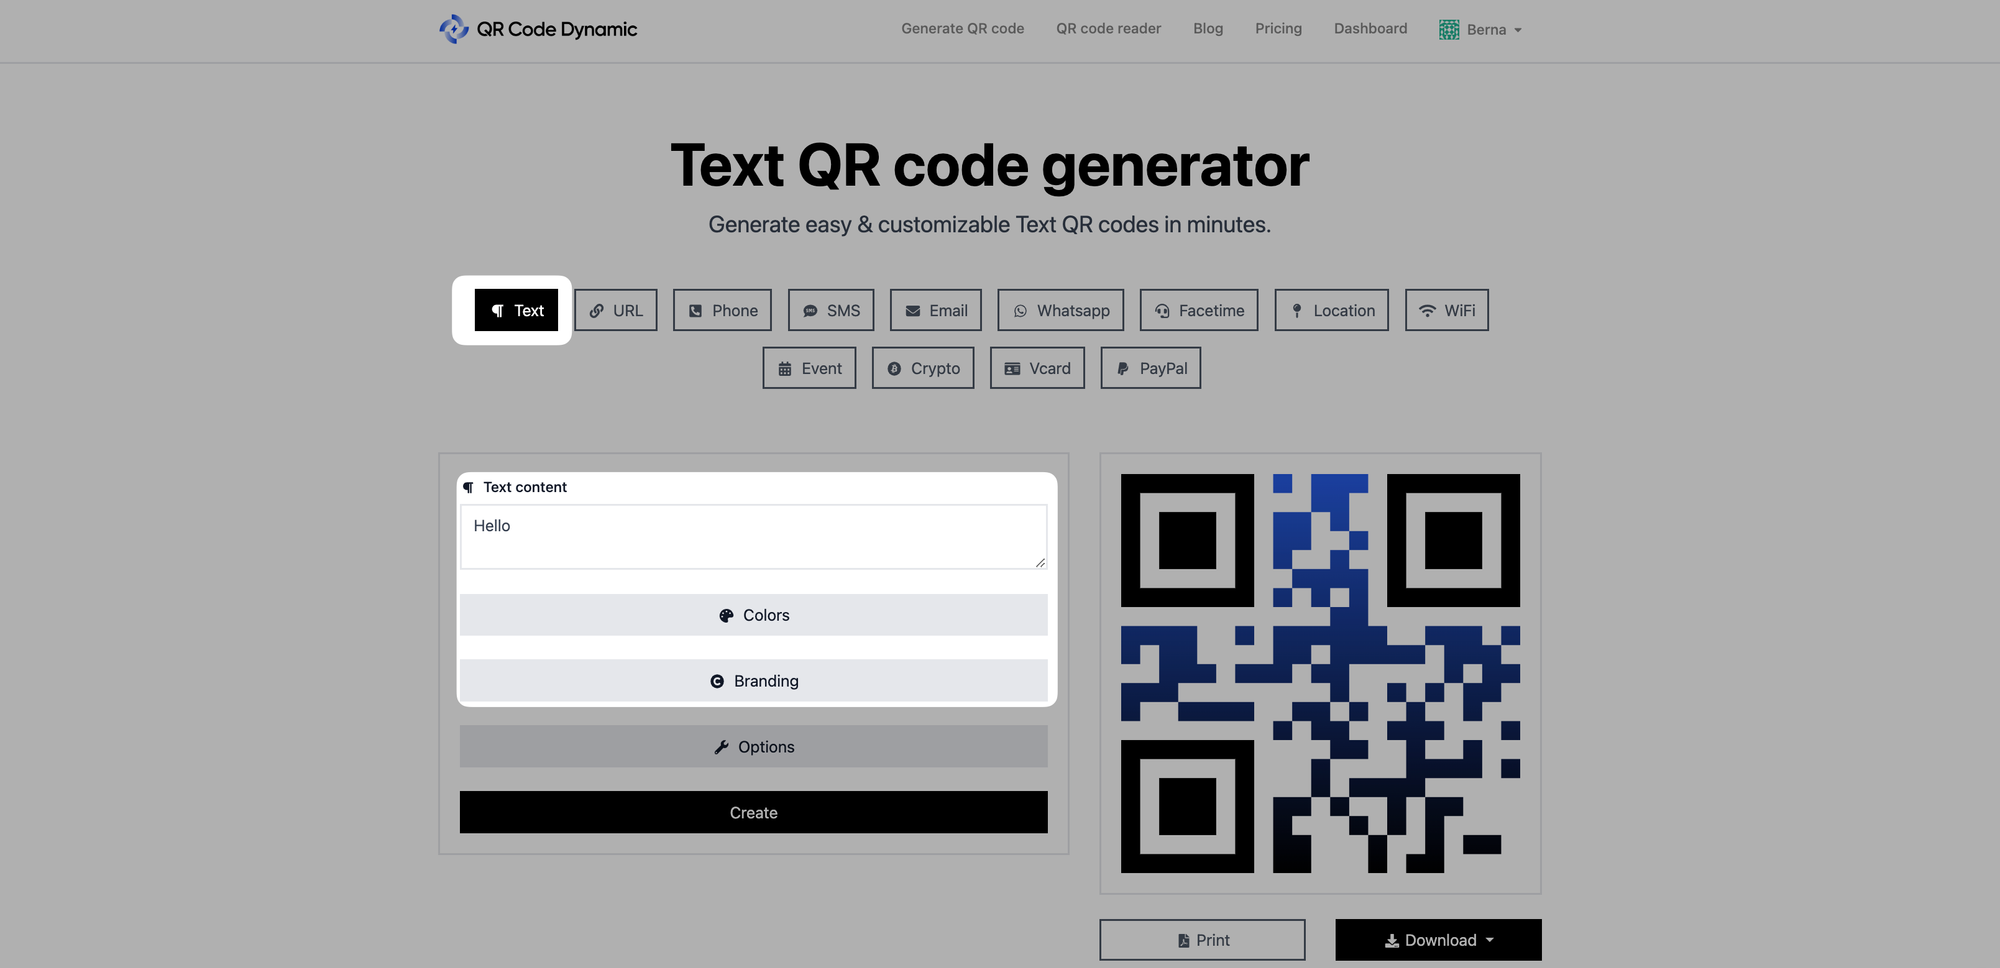 select qr type and customize it